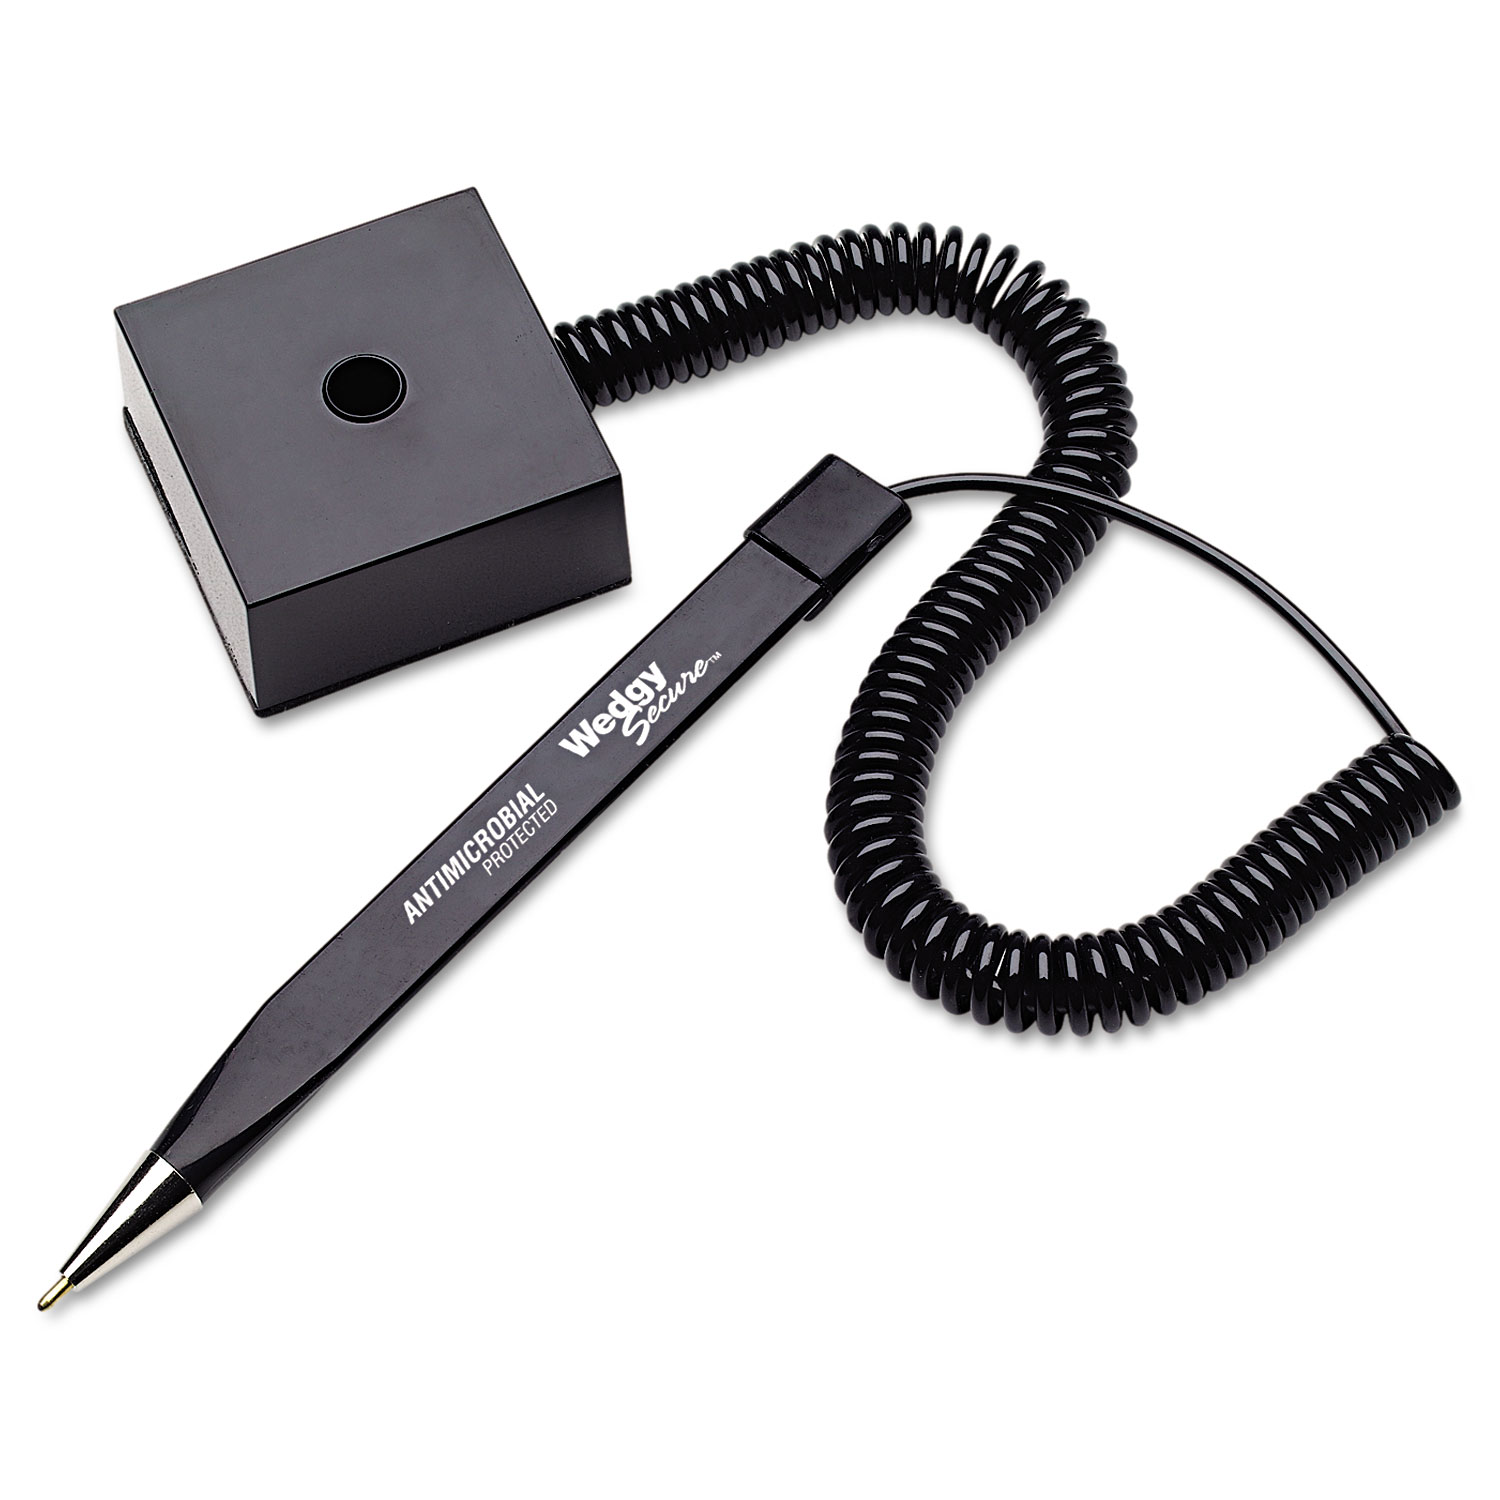  MMF Industries 25828504 Wedgy Secure Antimicrobial Ballpoint Counter Pen w/Square Base, .5mm, Black Ink/Barrel (MMF25828504) 